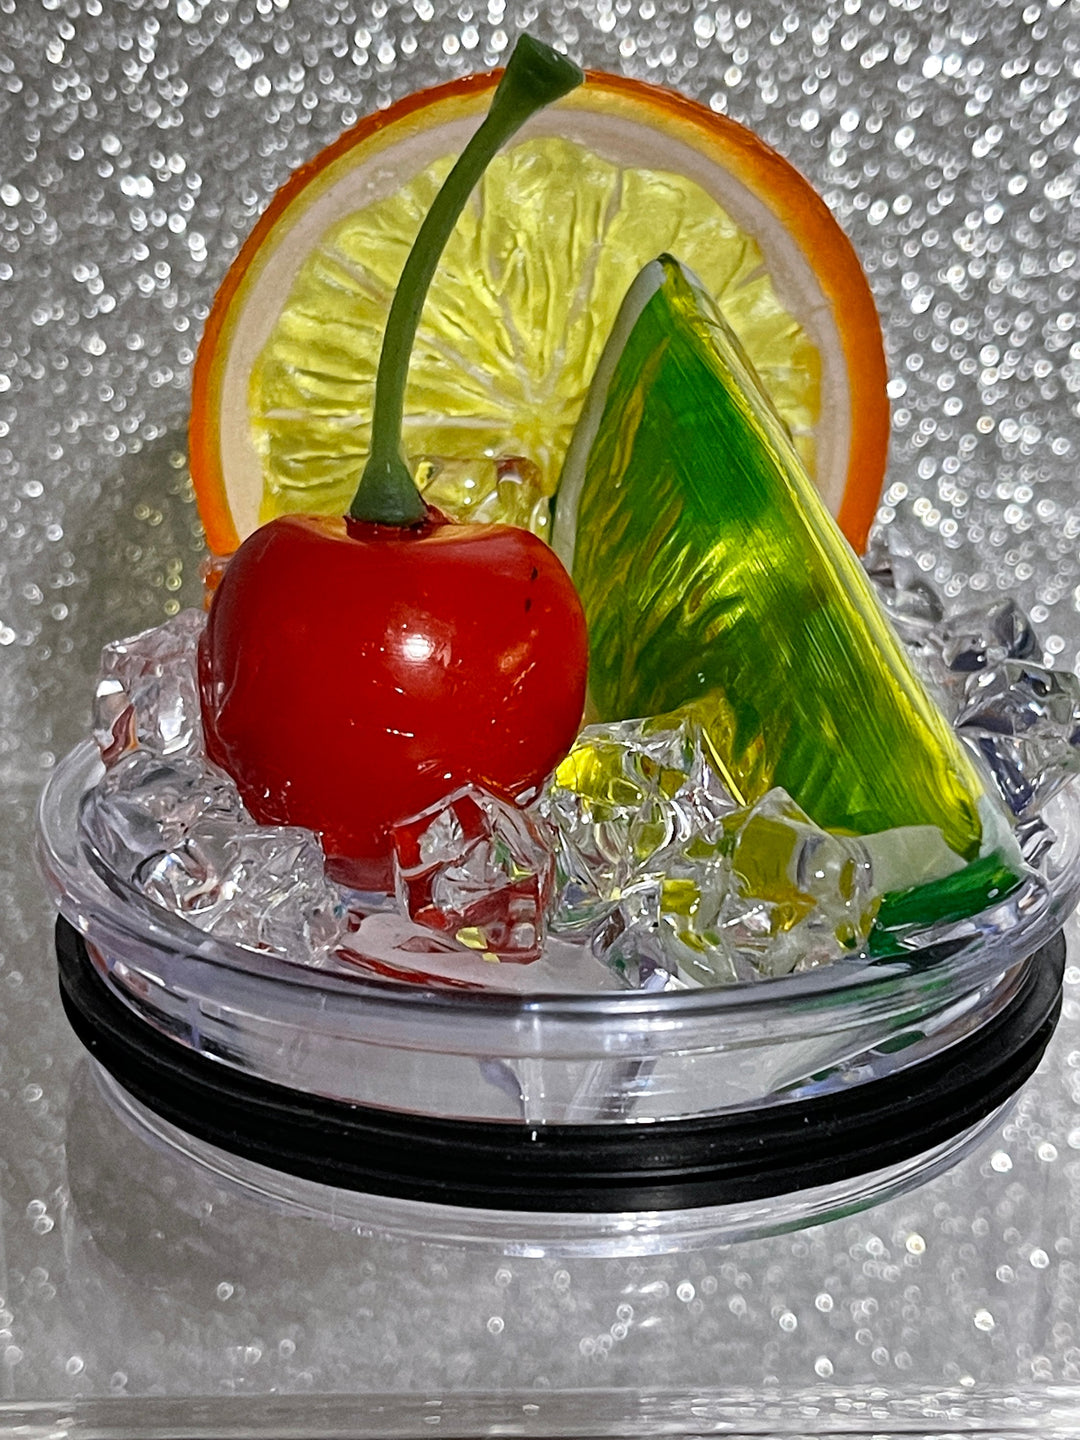 Fruit Tumbler Toppers that fit the 20 oz and 30 oz tumblers - Fruit Topped Tumbler Toppers - Decorative Lid for Tumblers, unique gift